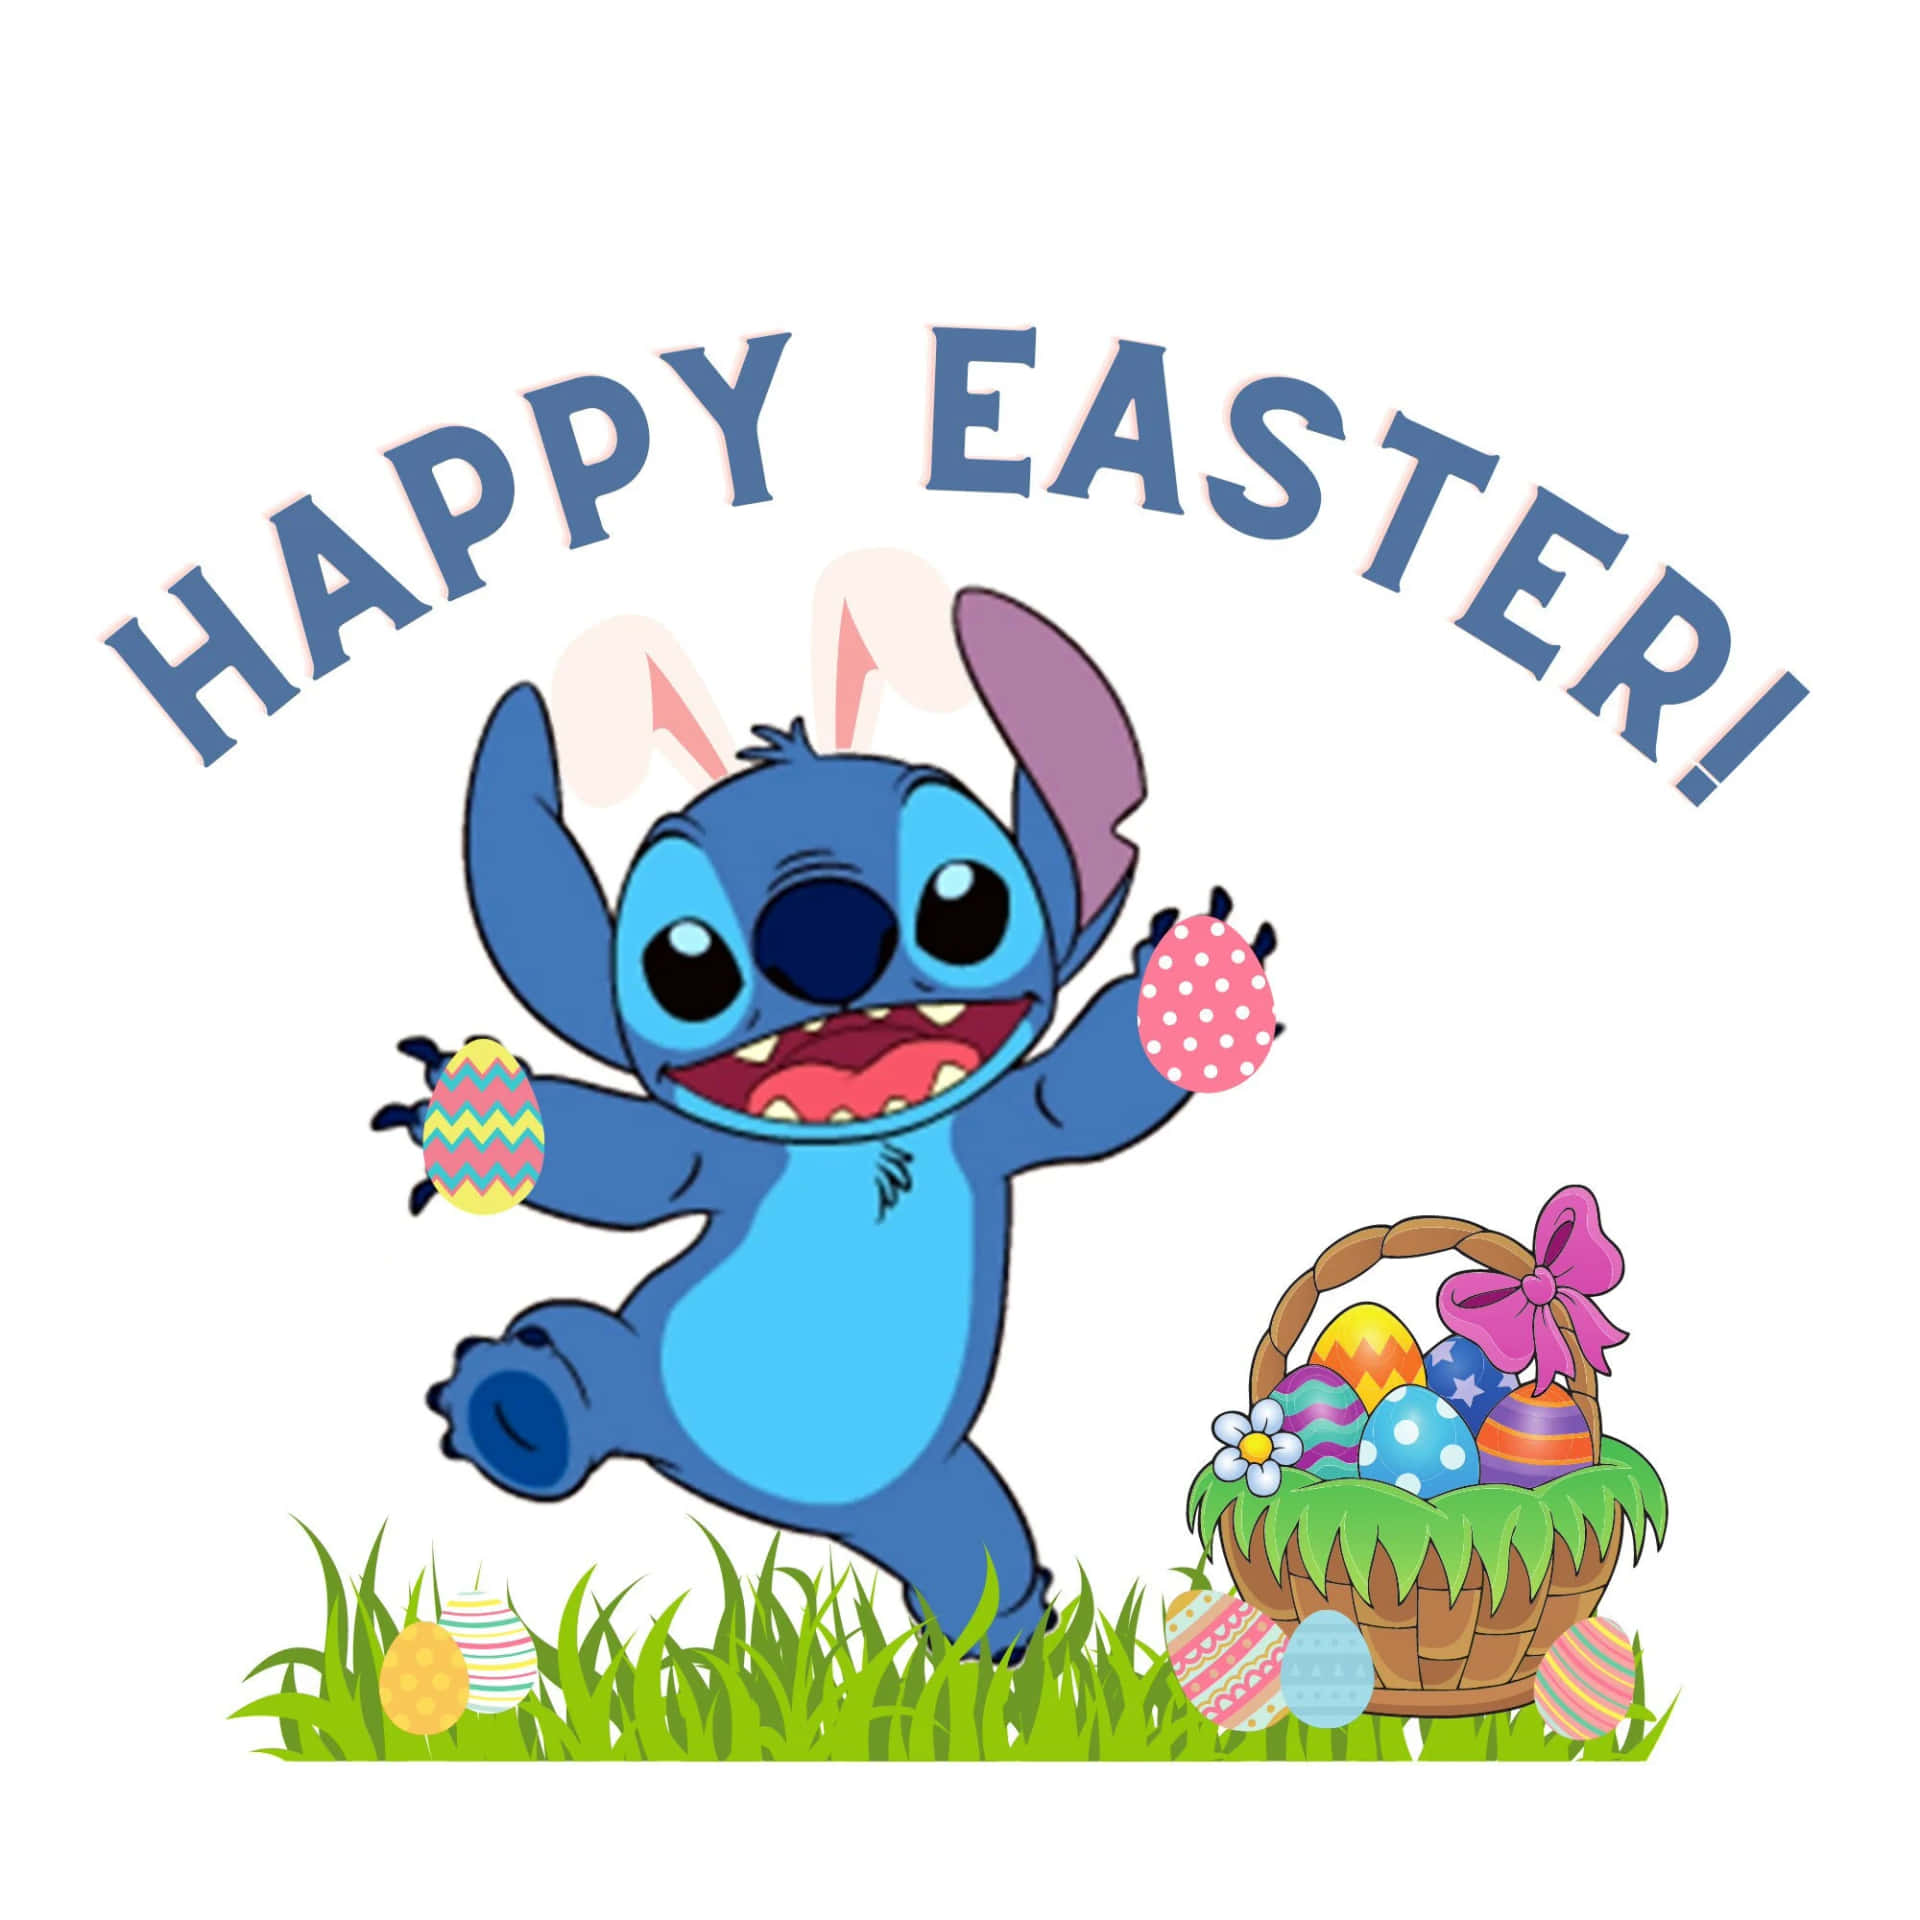 Easter Celebration Stitch With Eggs Wallpaper